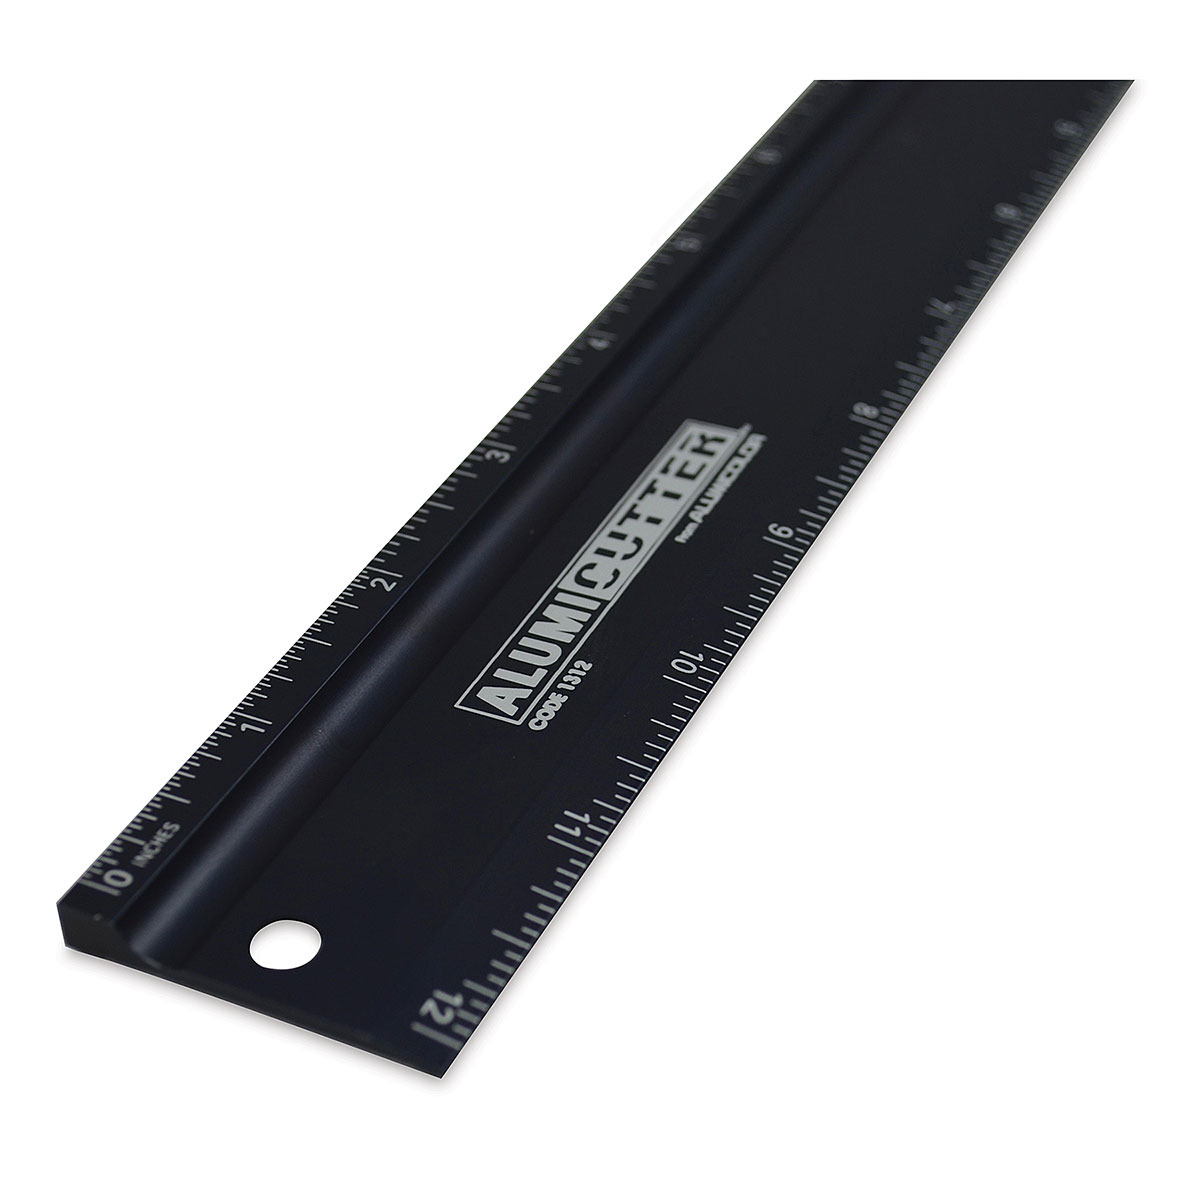 Alumicolor 12 AlumiCutter-Ruler and Straight Edge Cutting Tool Promotional  Product, Available in 7 different colors - EngineerSupply